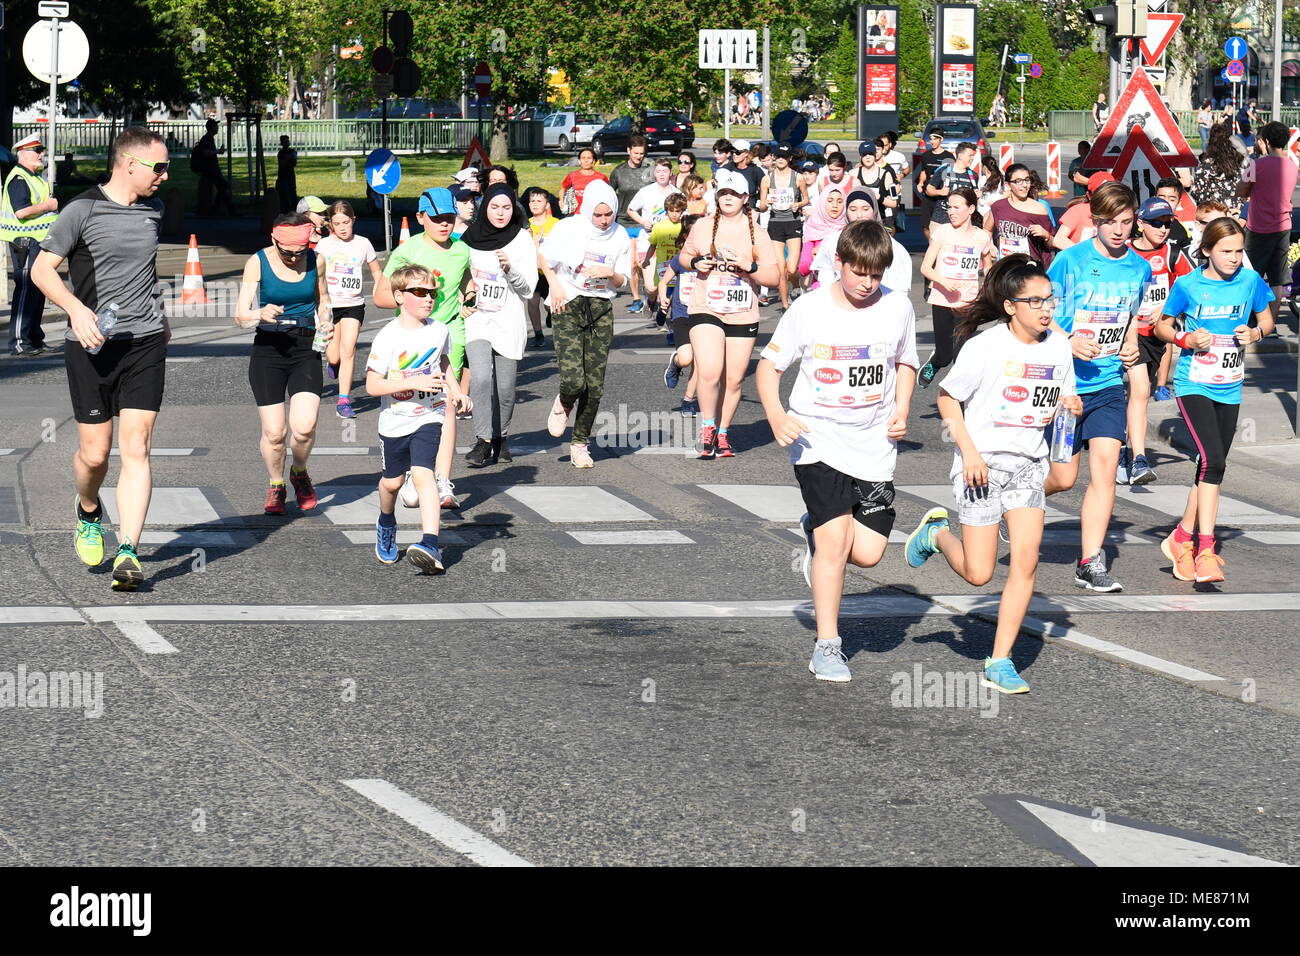 Vienna, Austria. April 21, 2018. AthleticsState Championships 10 km road running as part of the Vienna City Marathon from the Vienna Prater to the Burgtheater. Image shows the SanLucar kids run over 2 km and the GETMOVIN teen run over 5 km. Credit: Franz Perc / Alamy Live News Stock Photo